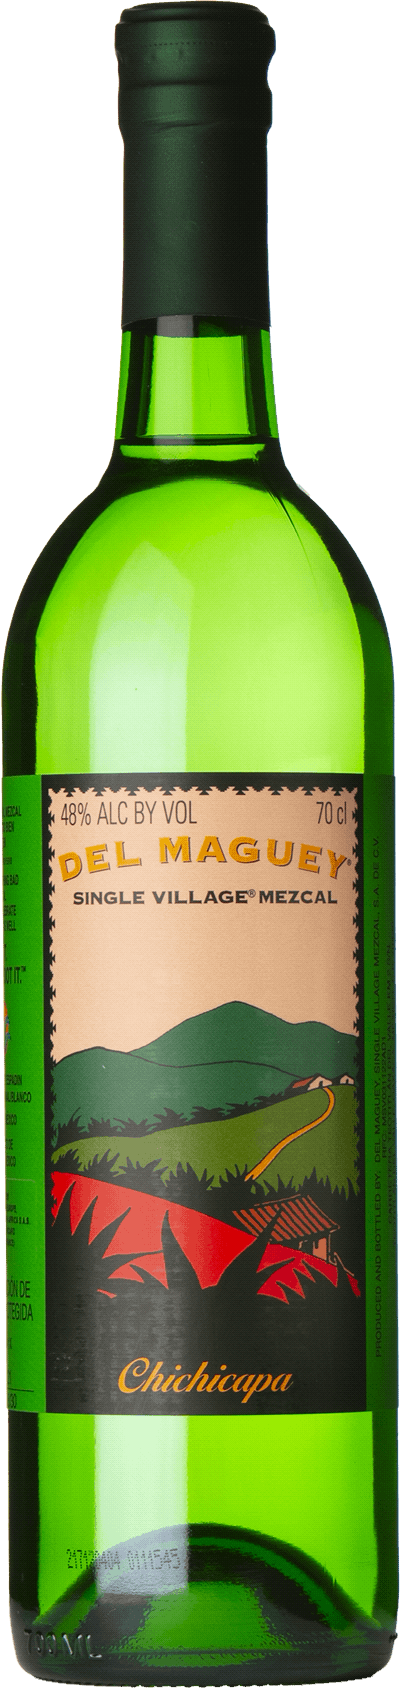 Del Maguey Chichicapa 